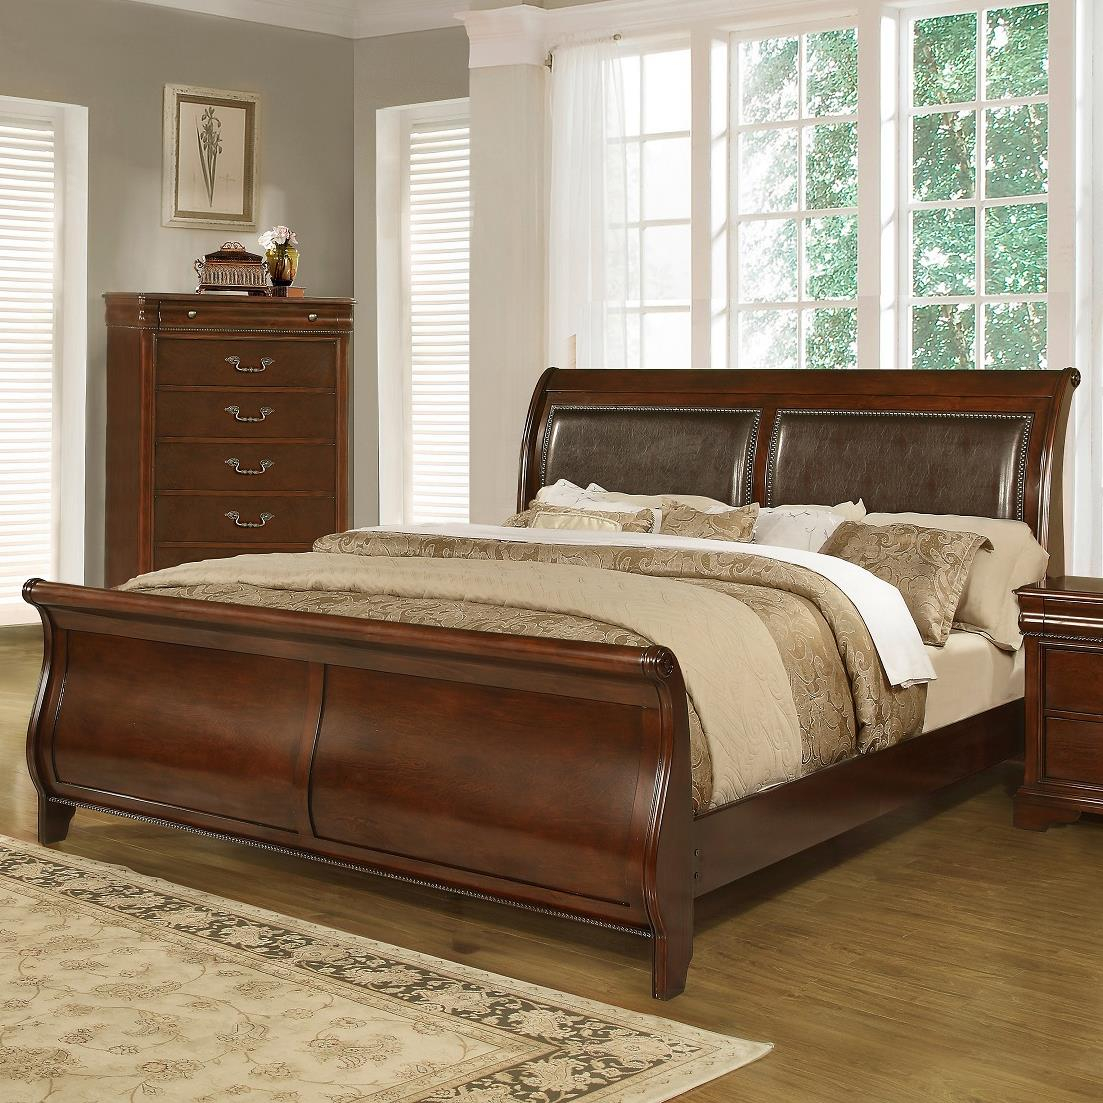 C4116a Traditional Queen Sleigh Bed Lifestyle At Furniture Fair North Carolina regarding sizing 1103 X 1103